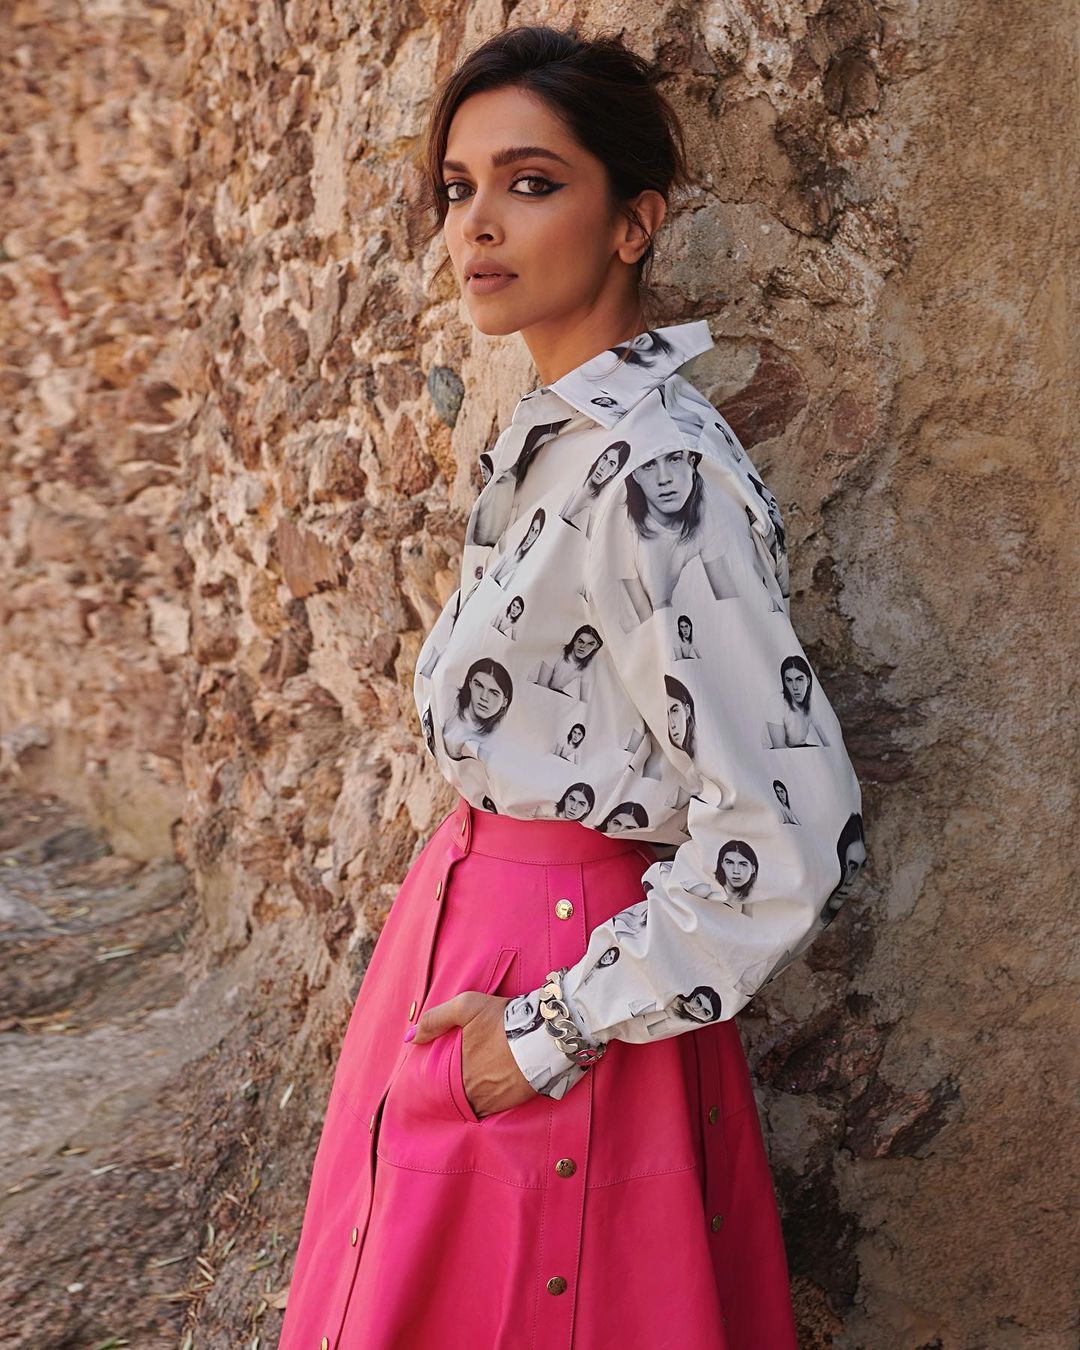 Deepika Padukone ups the hotness factor in a pink mini skirt and a black  turtleneck sweater from Louis Vuitton as she becomes Grazia's new cover  girl : Bollywood News - Bollywood Hungama